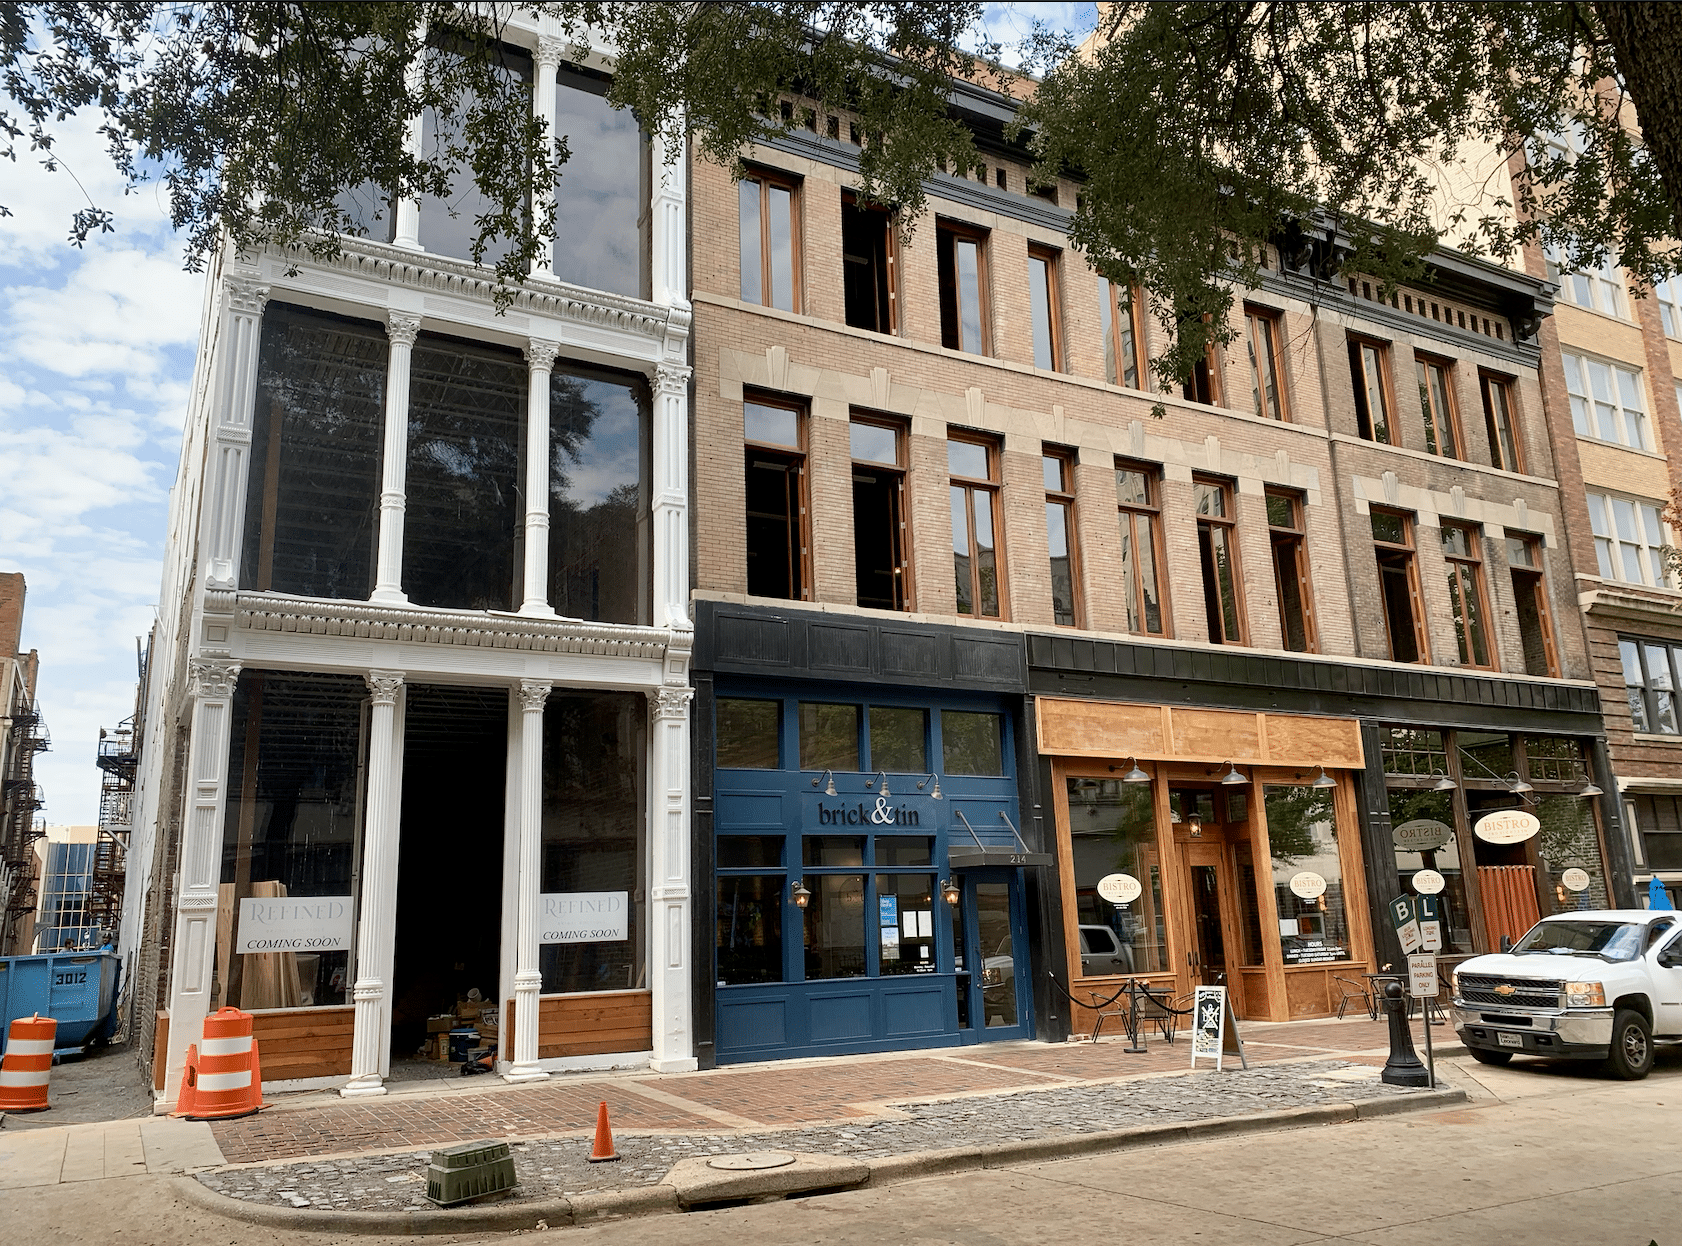 Iron Age Building Oct 2019 5 tenants announced for Iron Age Building in downtown Birmingham